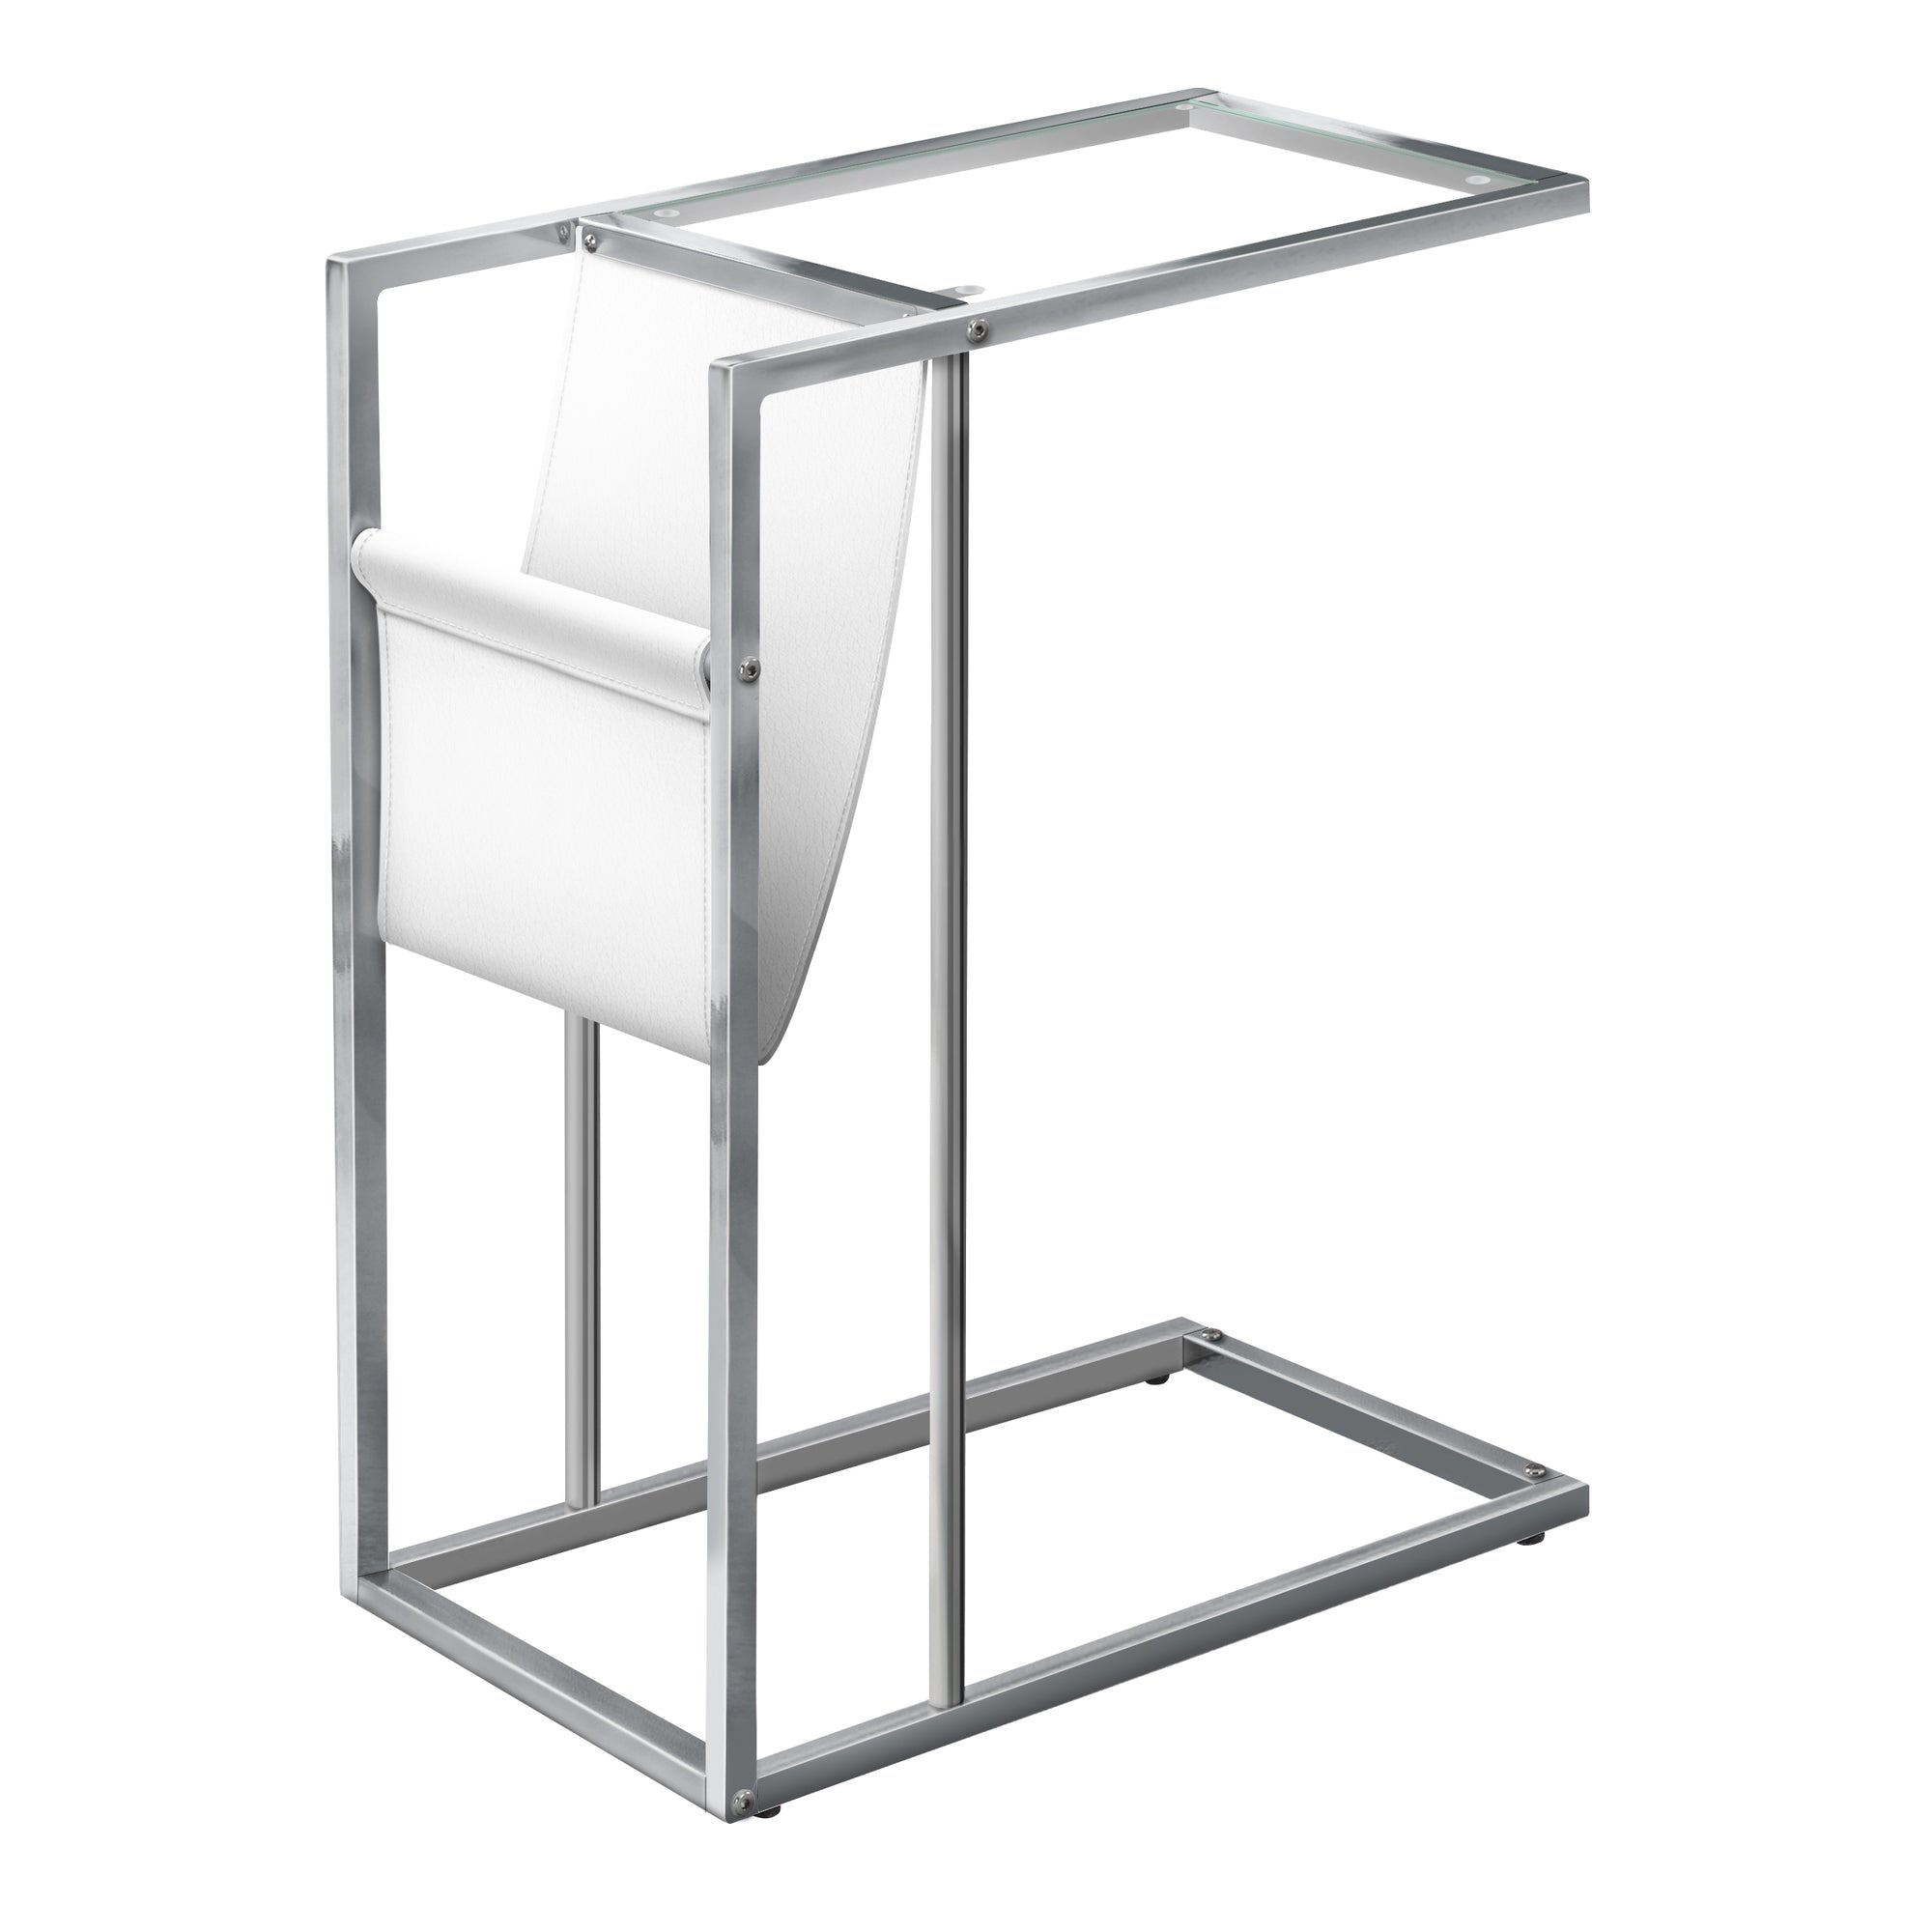 ACCENT TABLE - WHITE / CHROME METAL WITH A MAGAZINE RACK